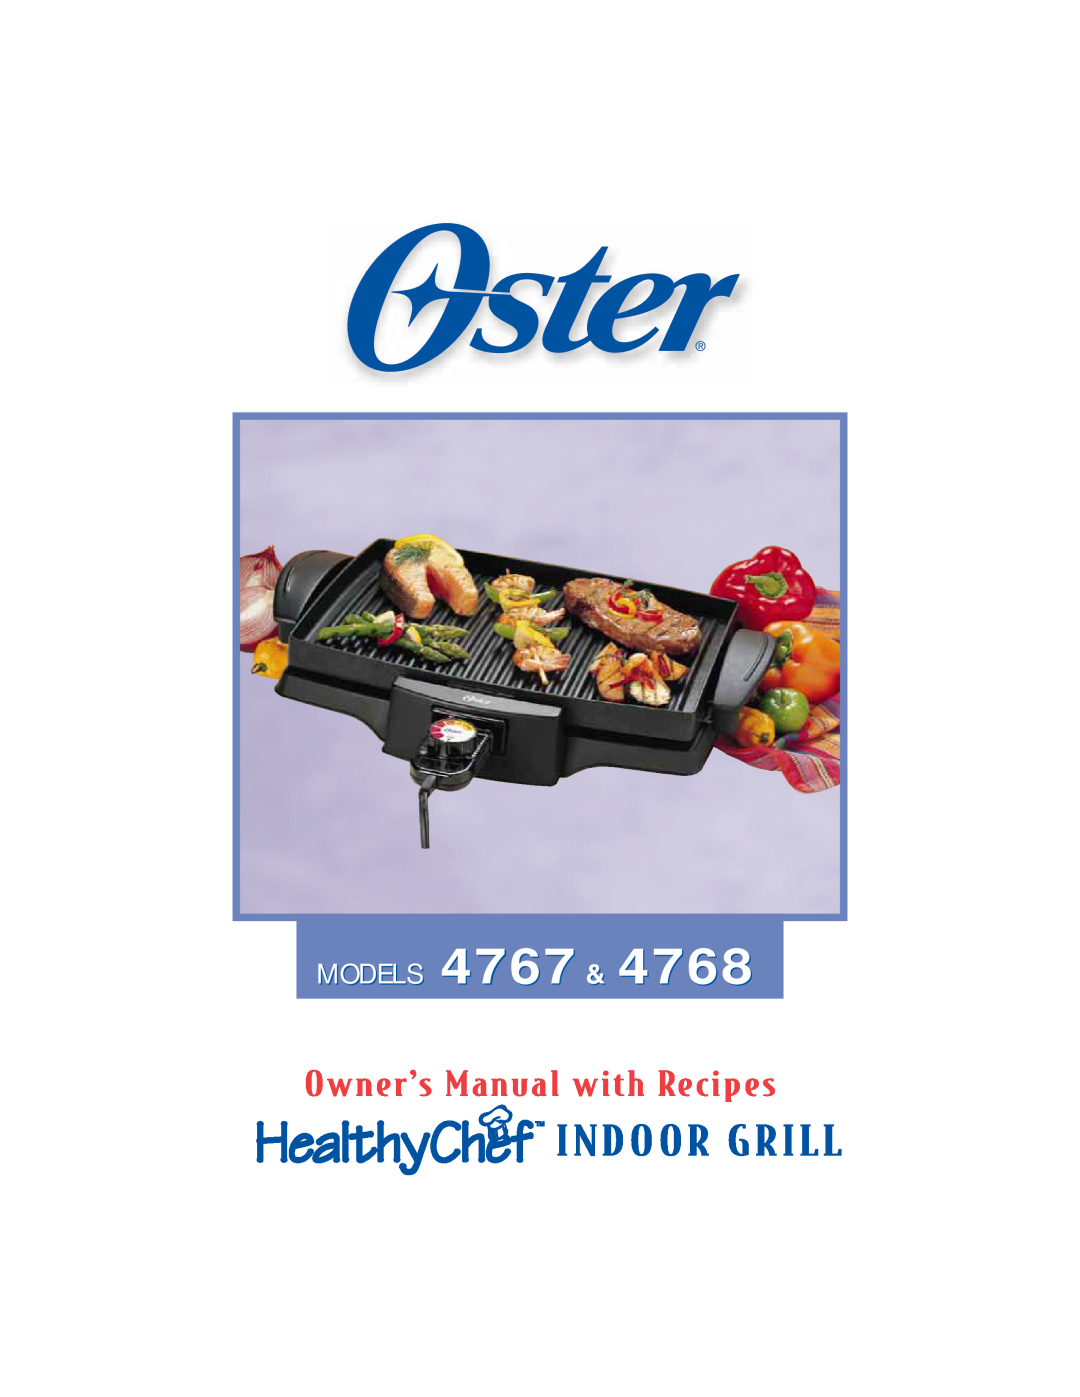 Oster 4768 owner manual MODELS 4767, Indoor Grill, OwnerÕs Manual with Recipes 